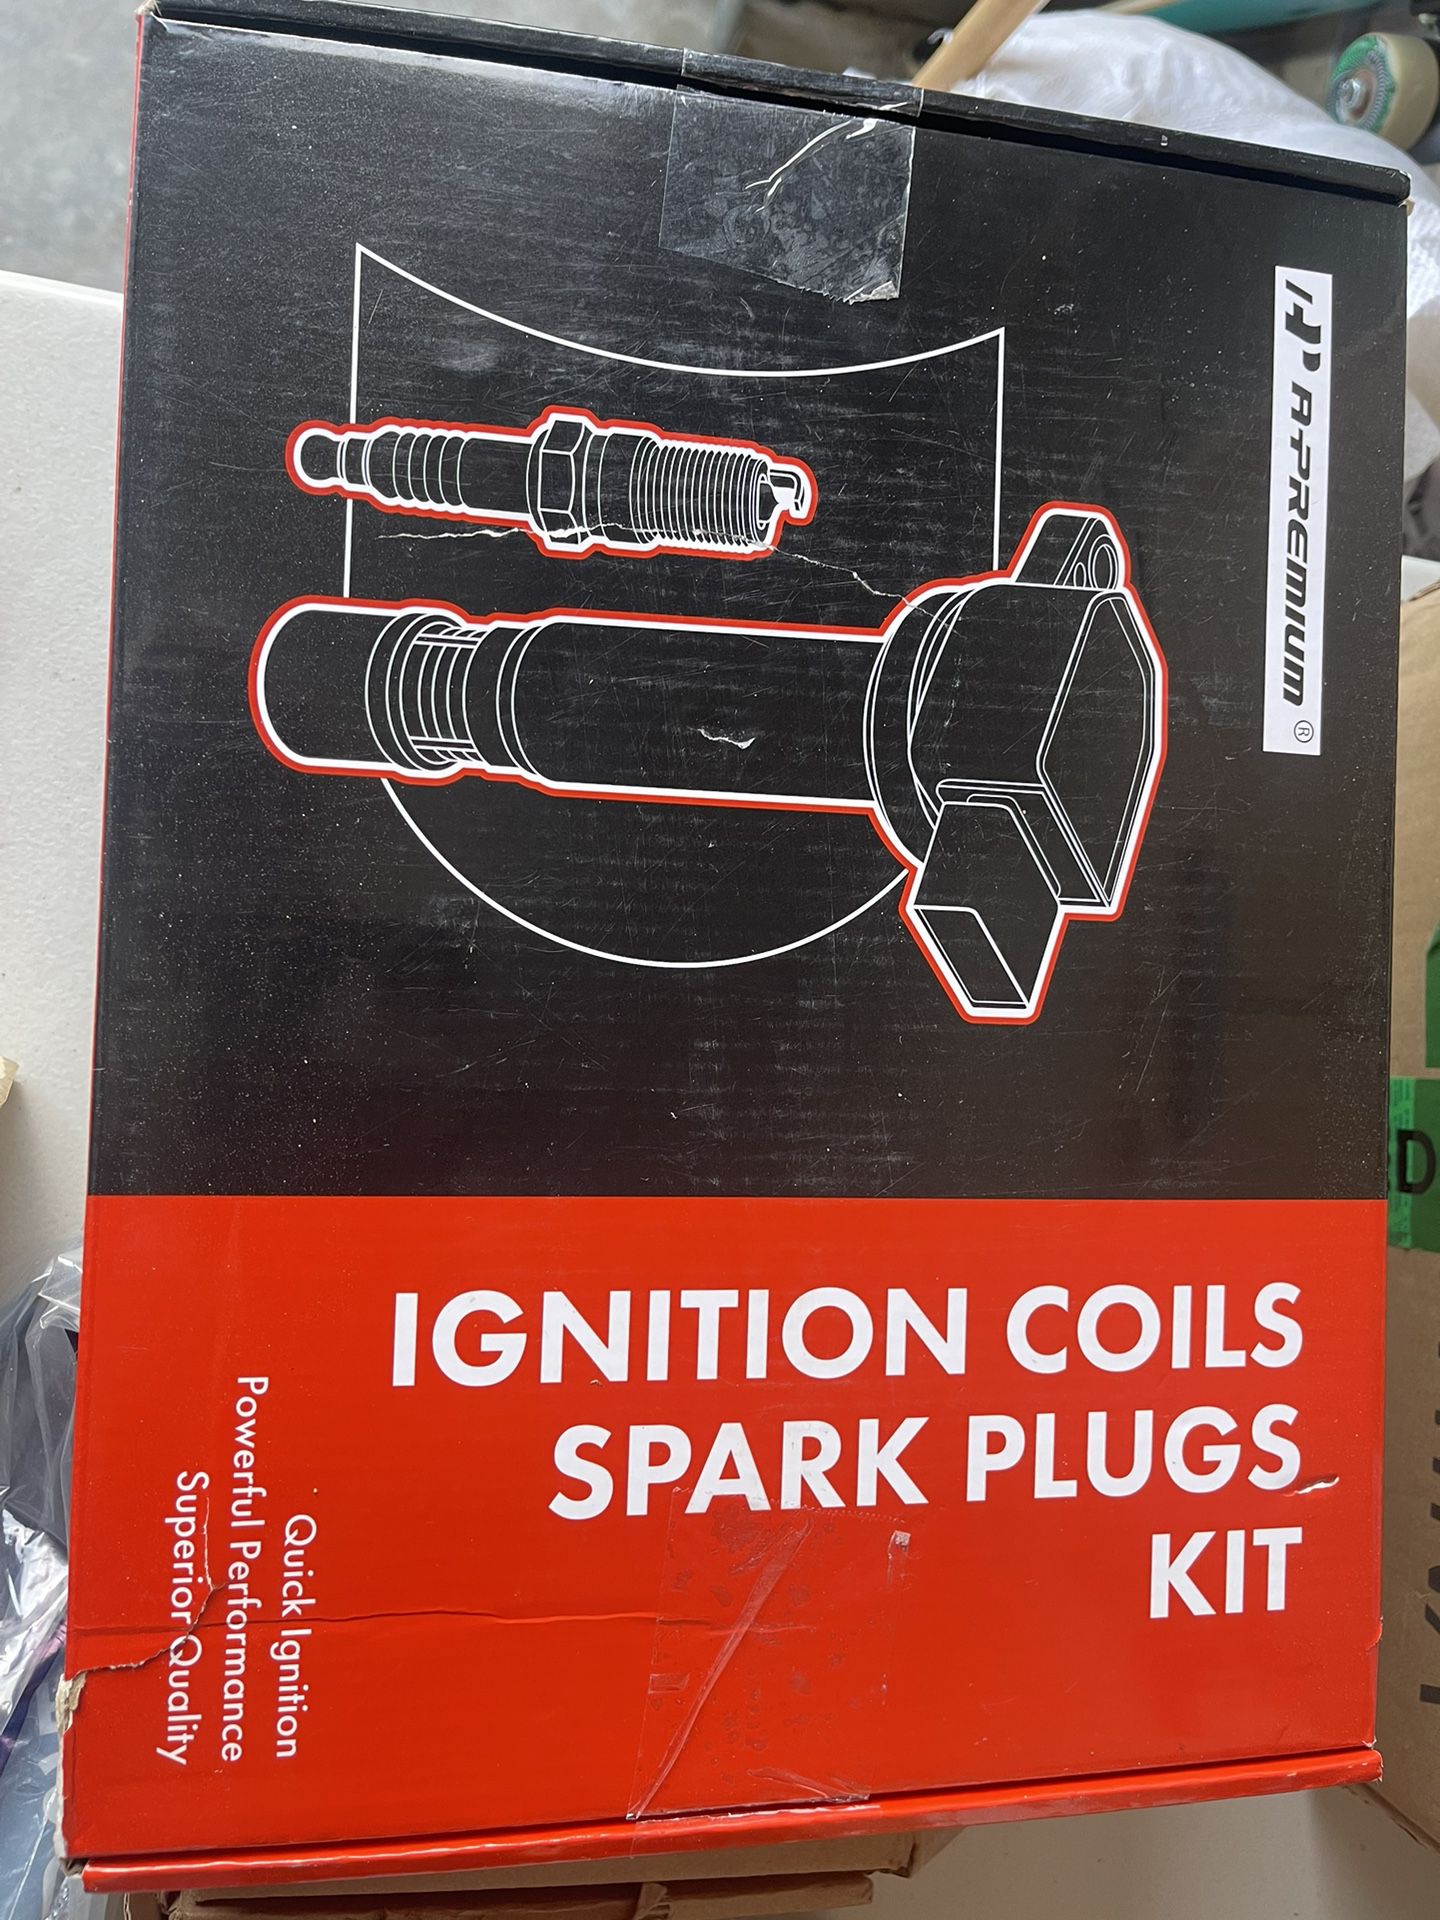 IGNITION COILS SPARK PLUGS KIT